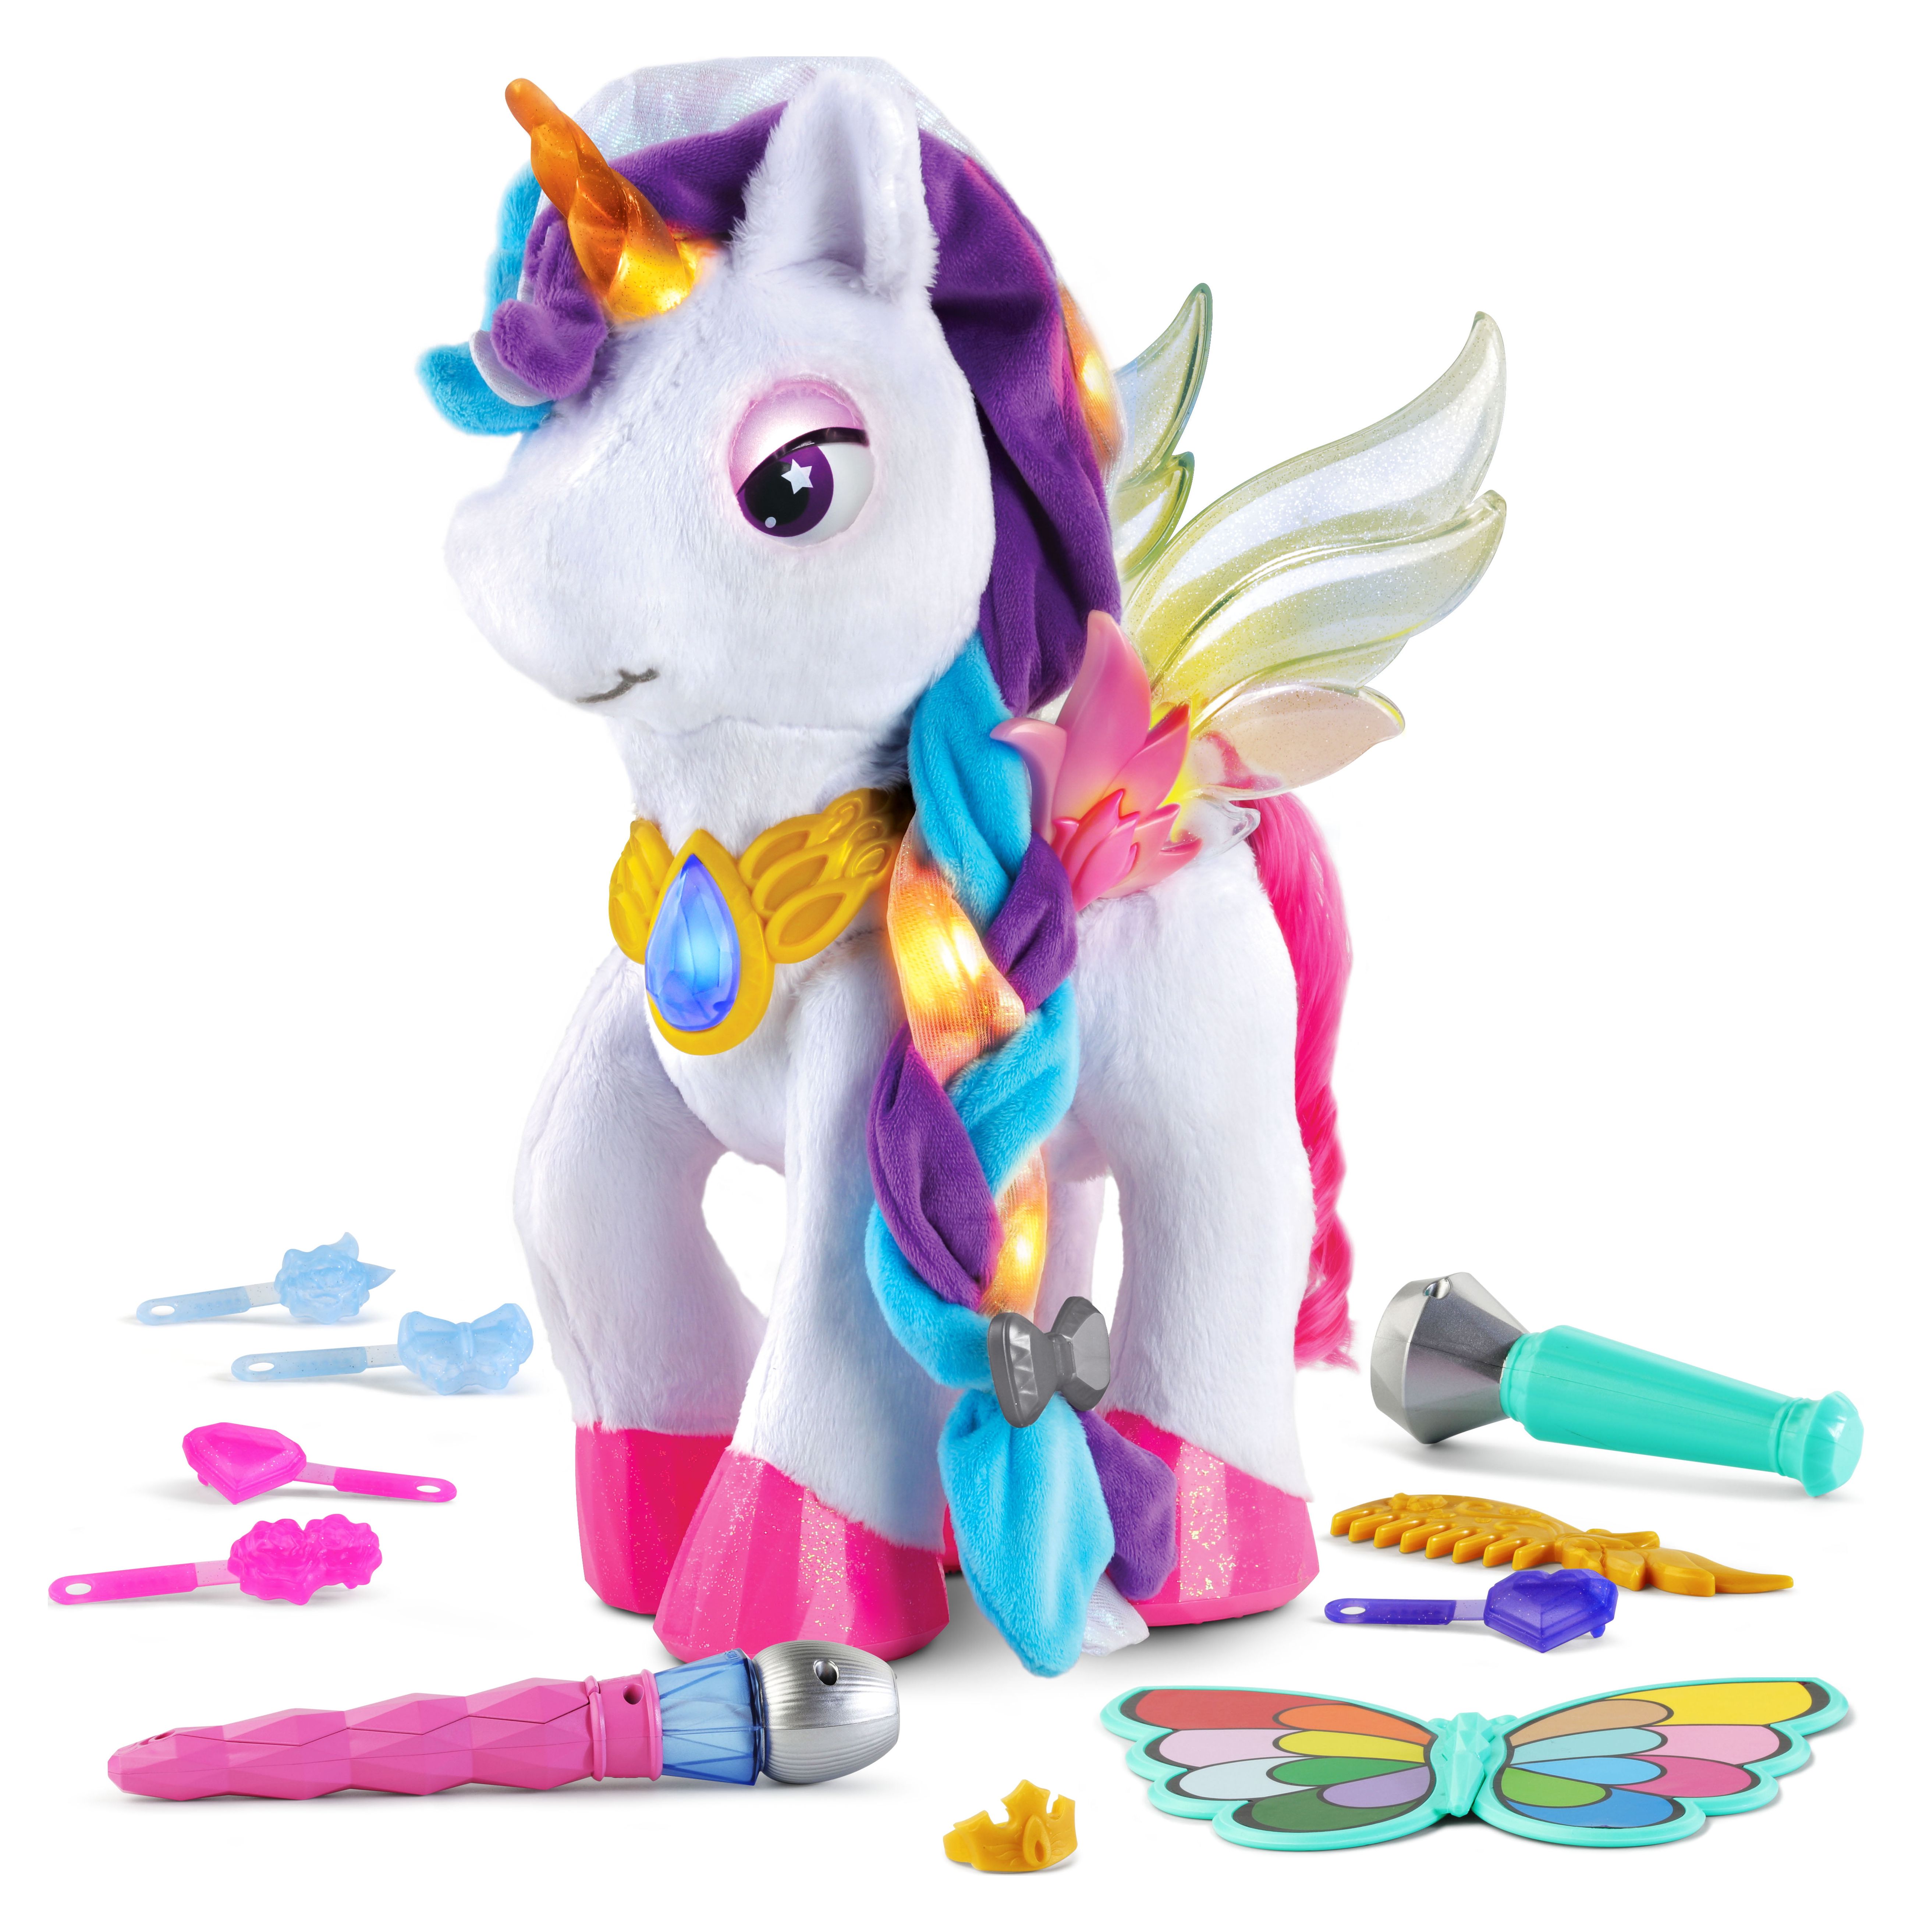 VTech Myla the Magical Unicorn, Interactive Electronic Pet for Kids - image 1 of 17